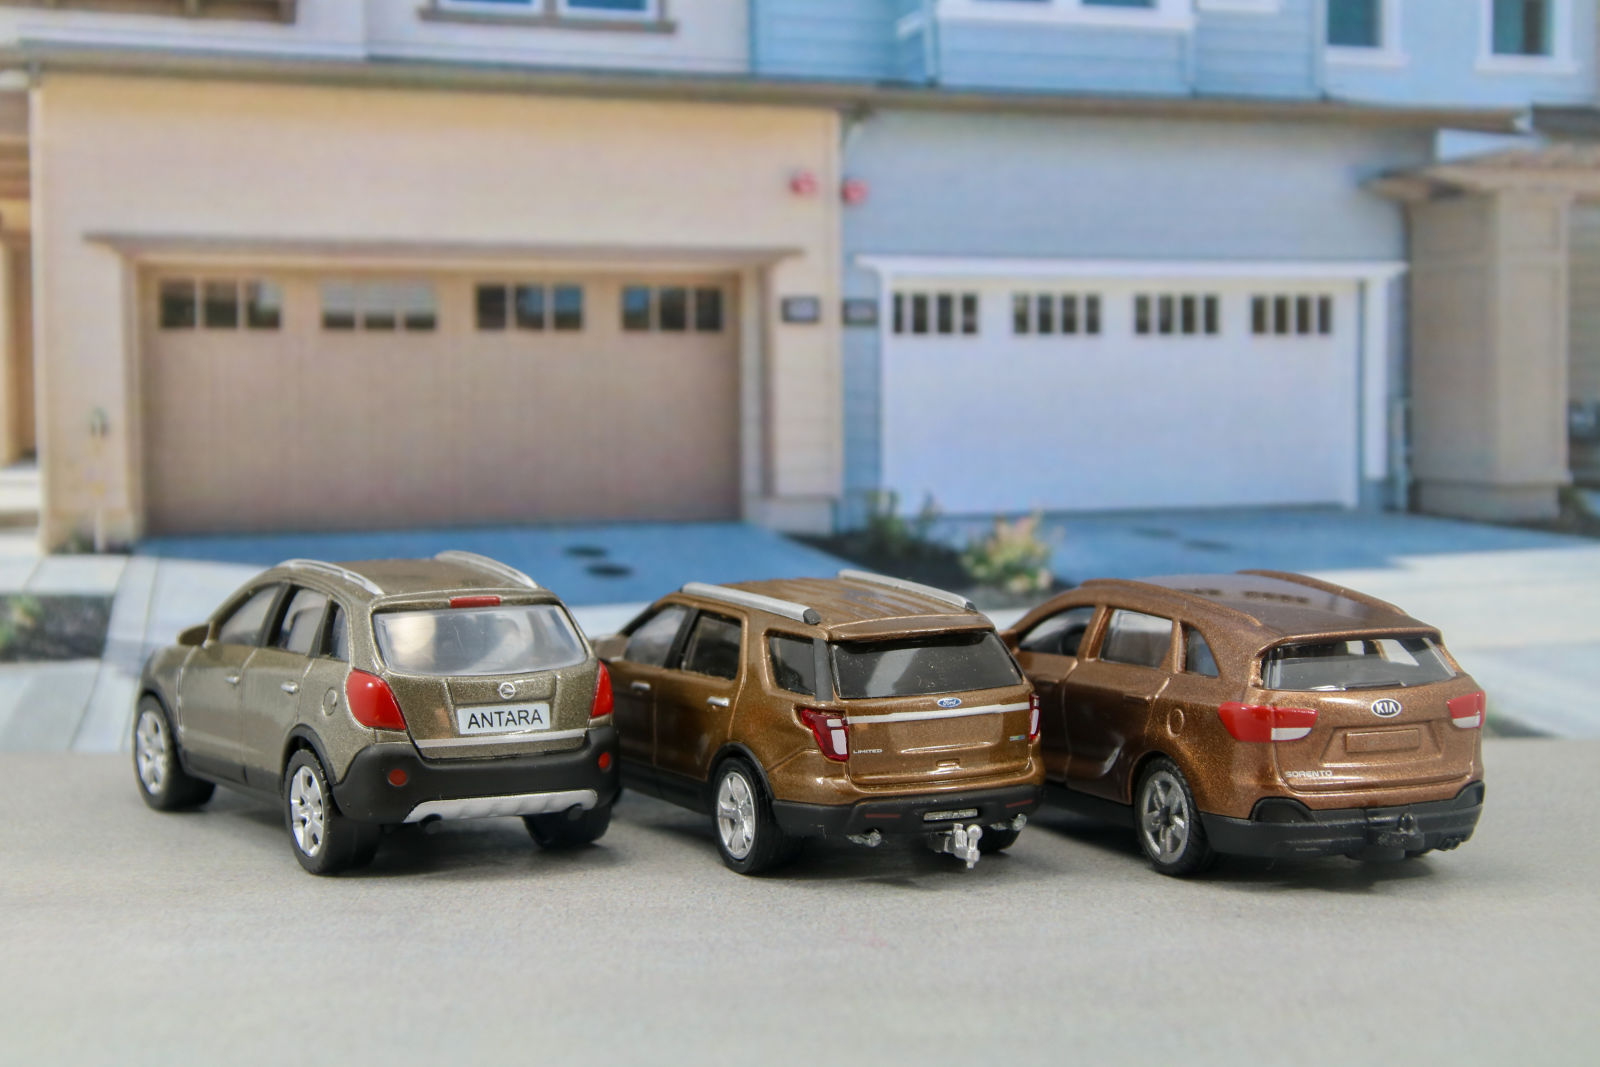 Illustration for article titled Suburban Sundays: A Trio of Brown CUVs